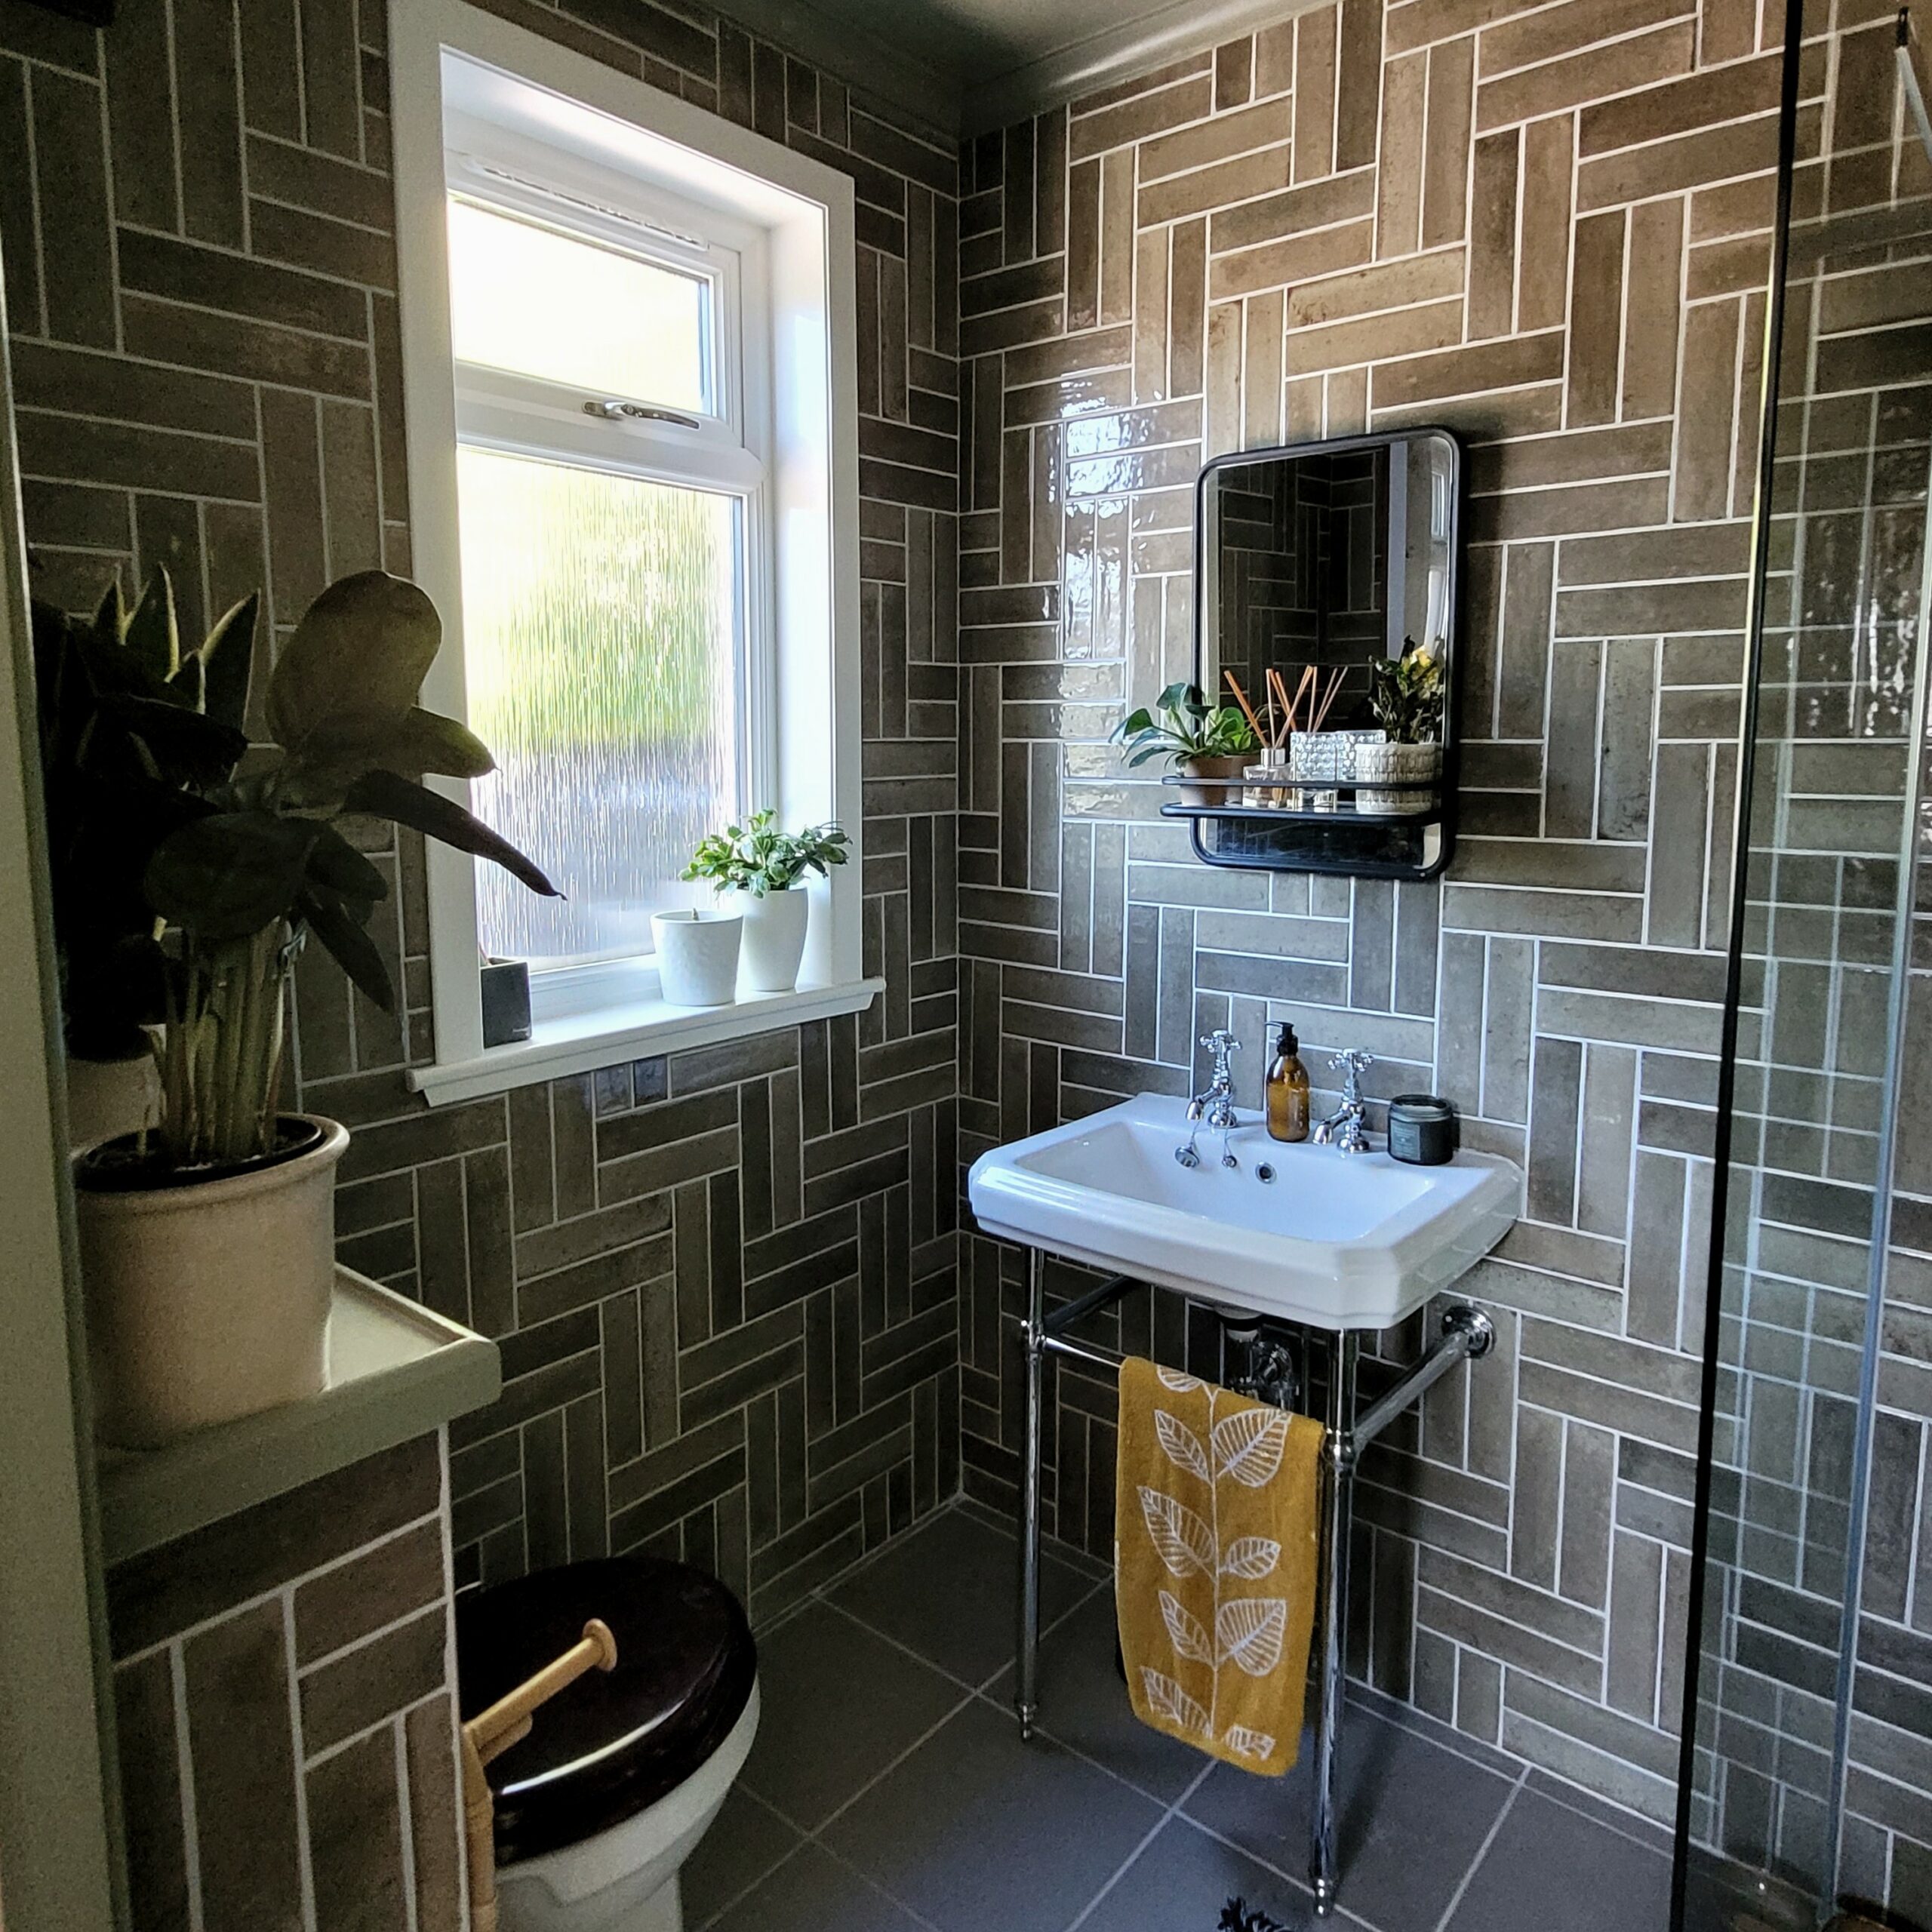 Gina Created a Natural Look in Her Bathroom with our Hope Mink Tiles